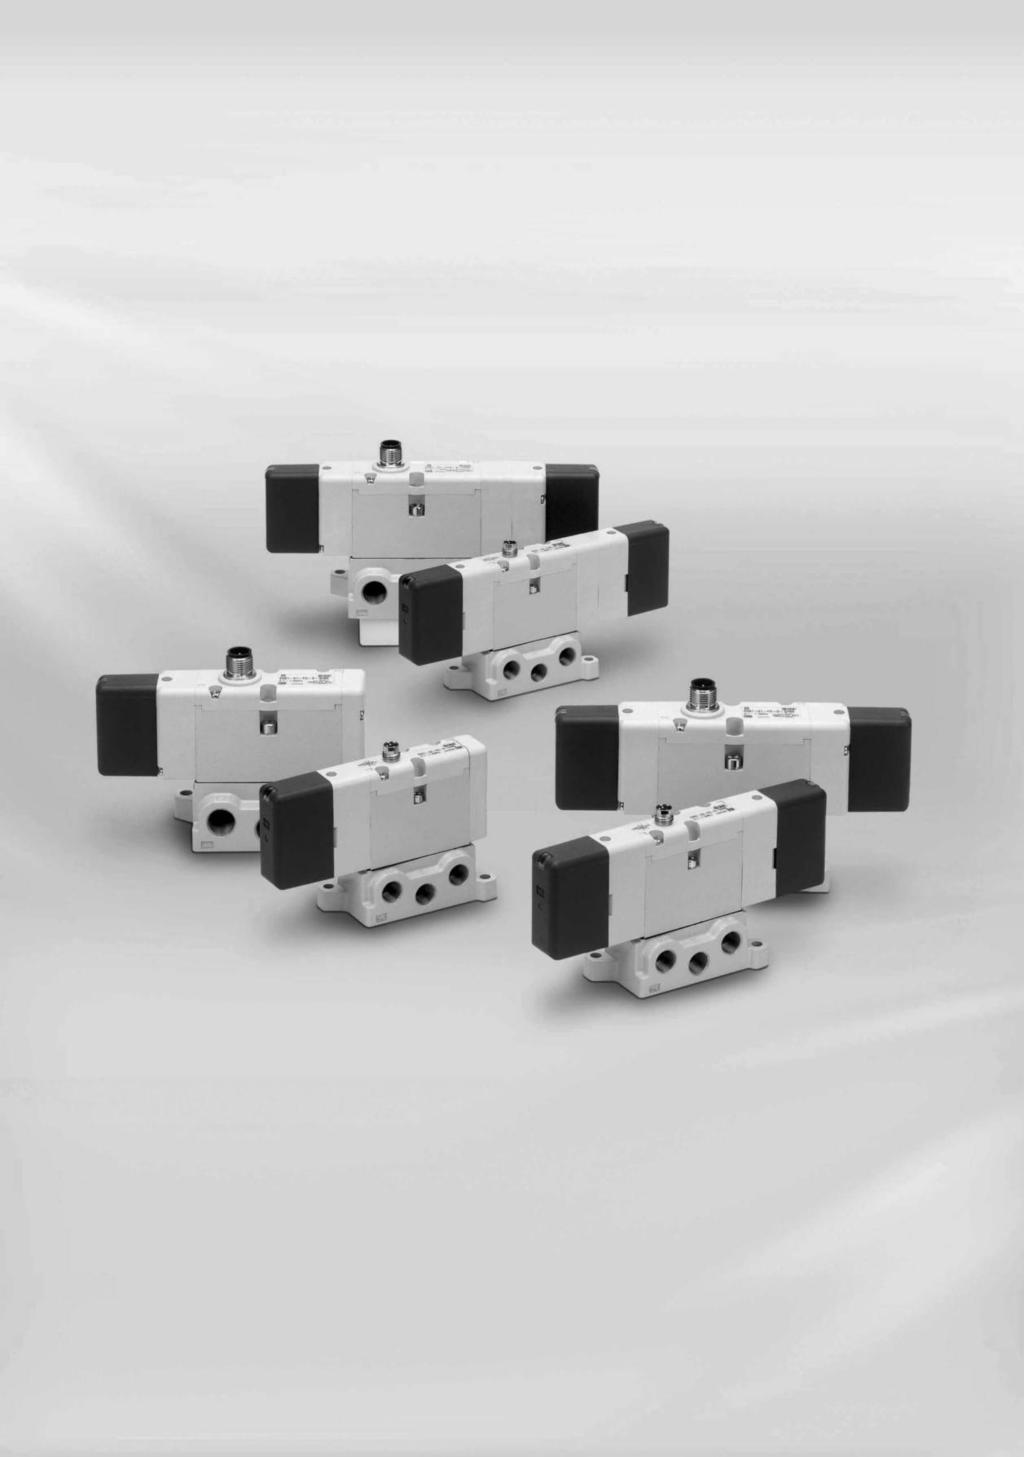 Conforming to ISO Standard Solenoid Valve (with M Connector) Series -0/-0 (Size ) (Size ) Large capacity -0 (Size: 0) -0 (Size: 0) Lightweight Size 0 ( position): 0.6 kg Size 0 ( position): 0.